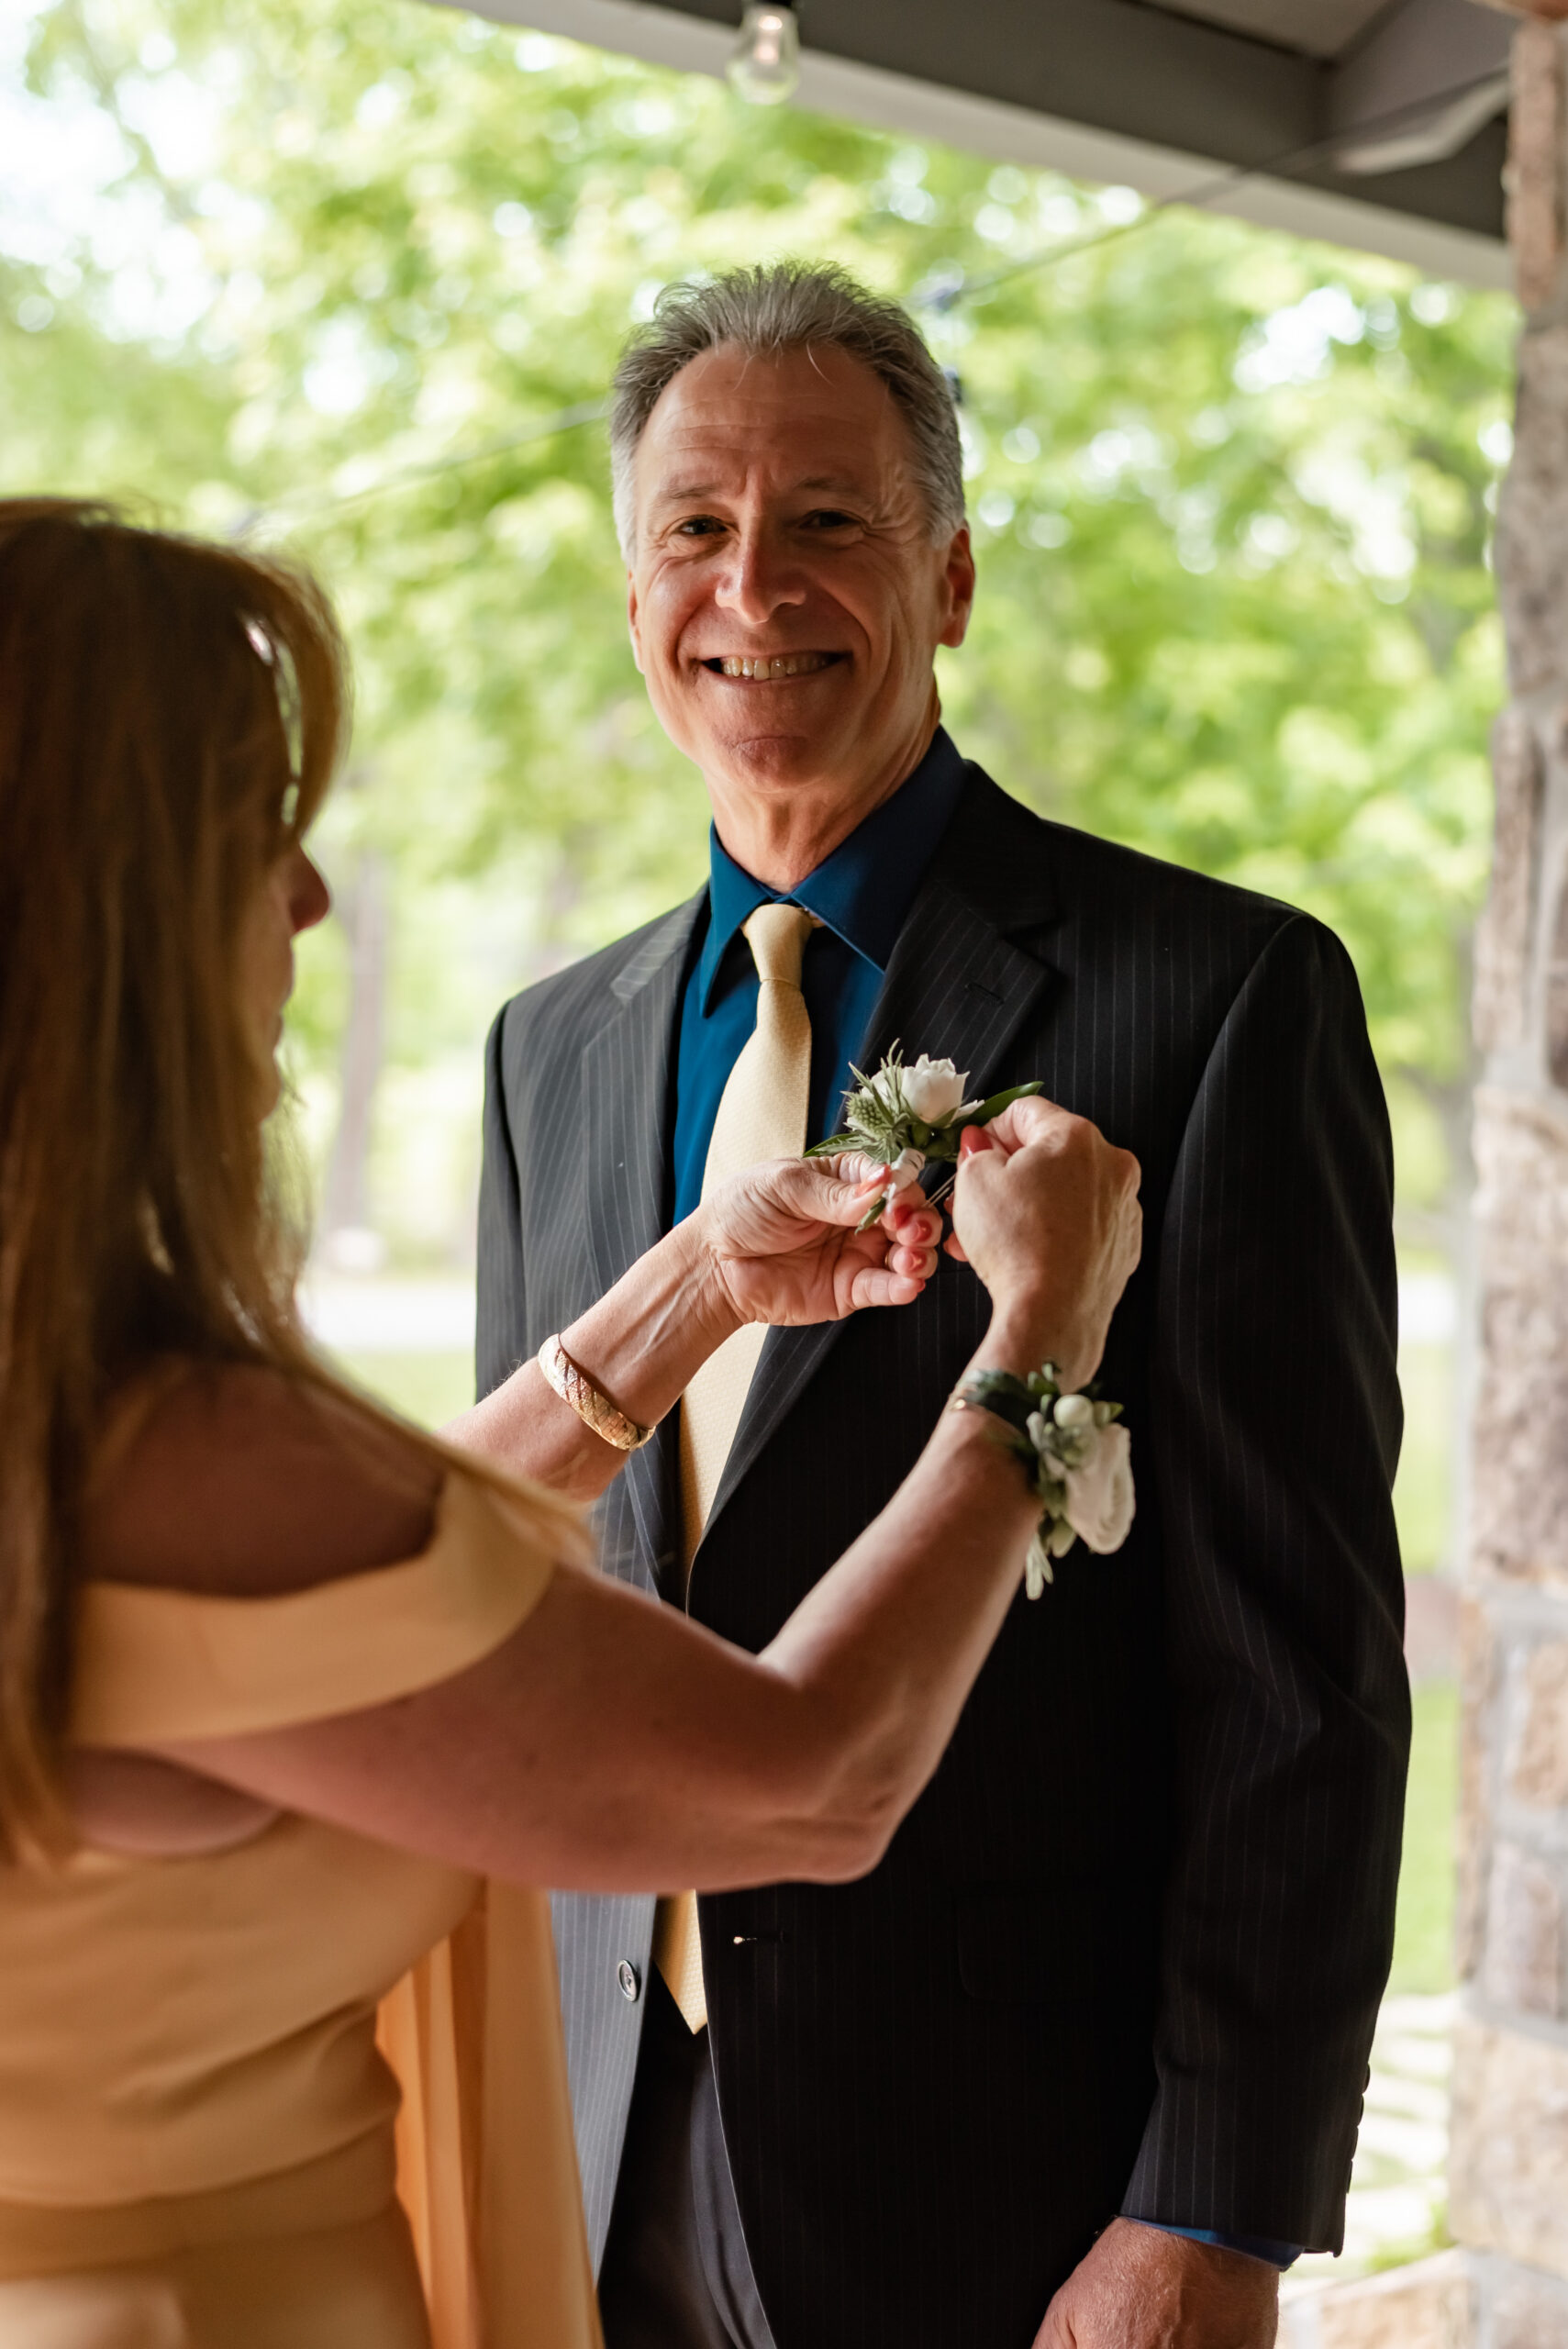 Mother of groom helps father with boutonniere